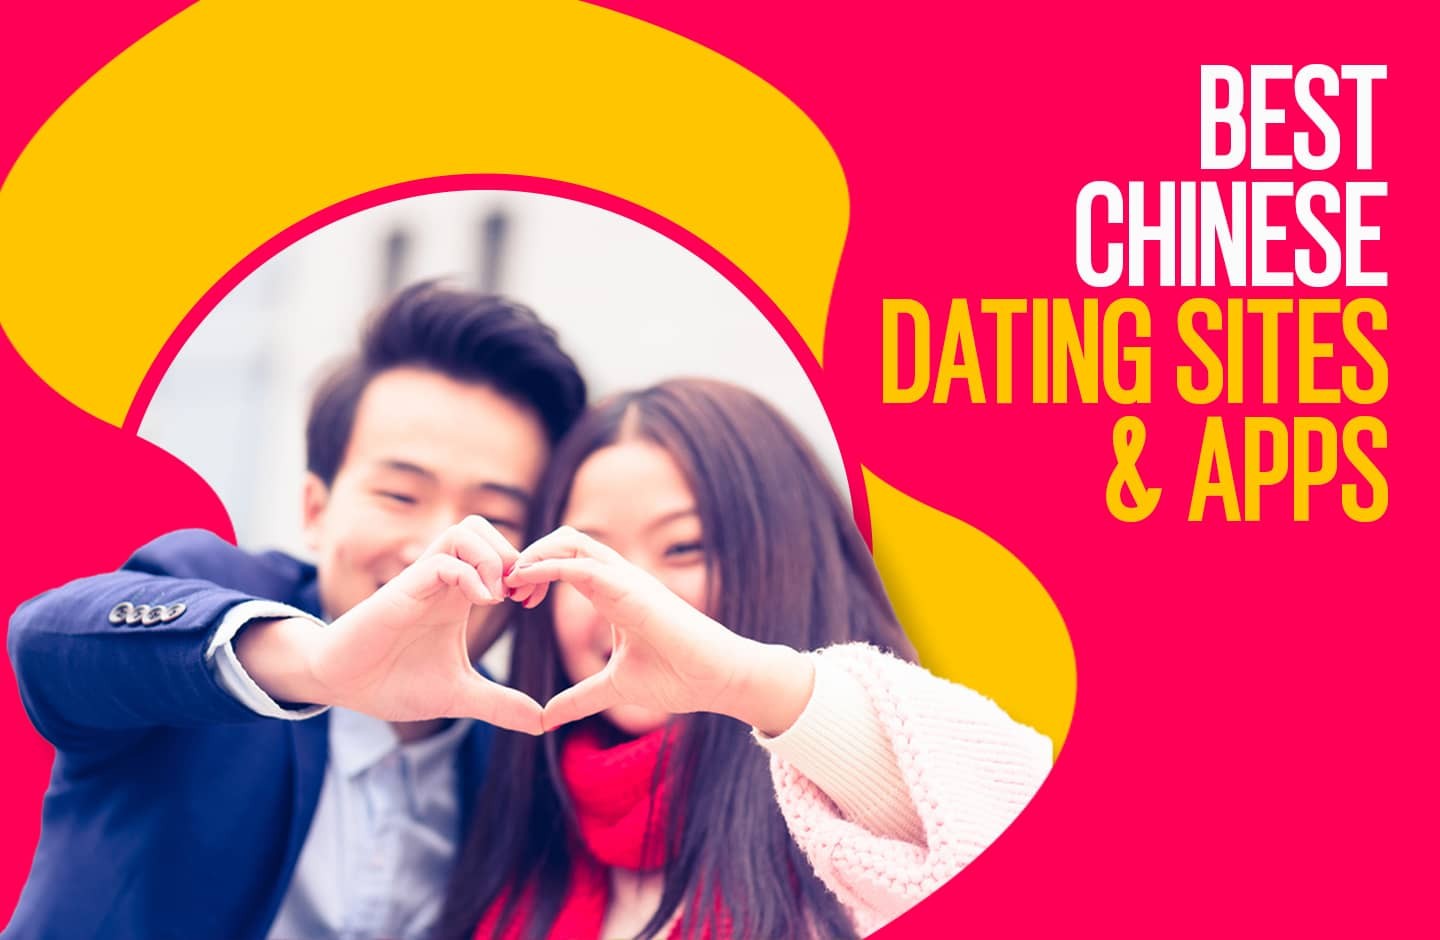 Hong Kong's Best Online Dating Sites Comparison Tool